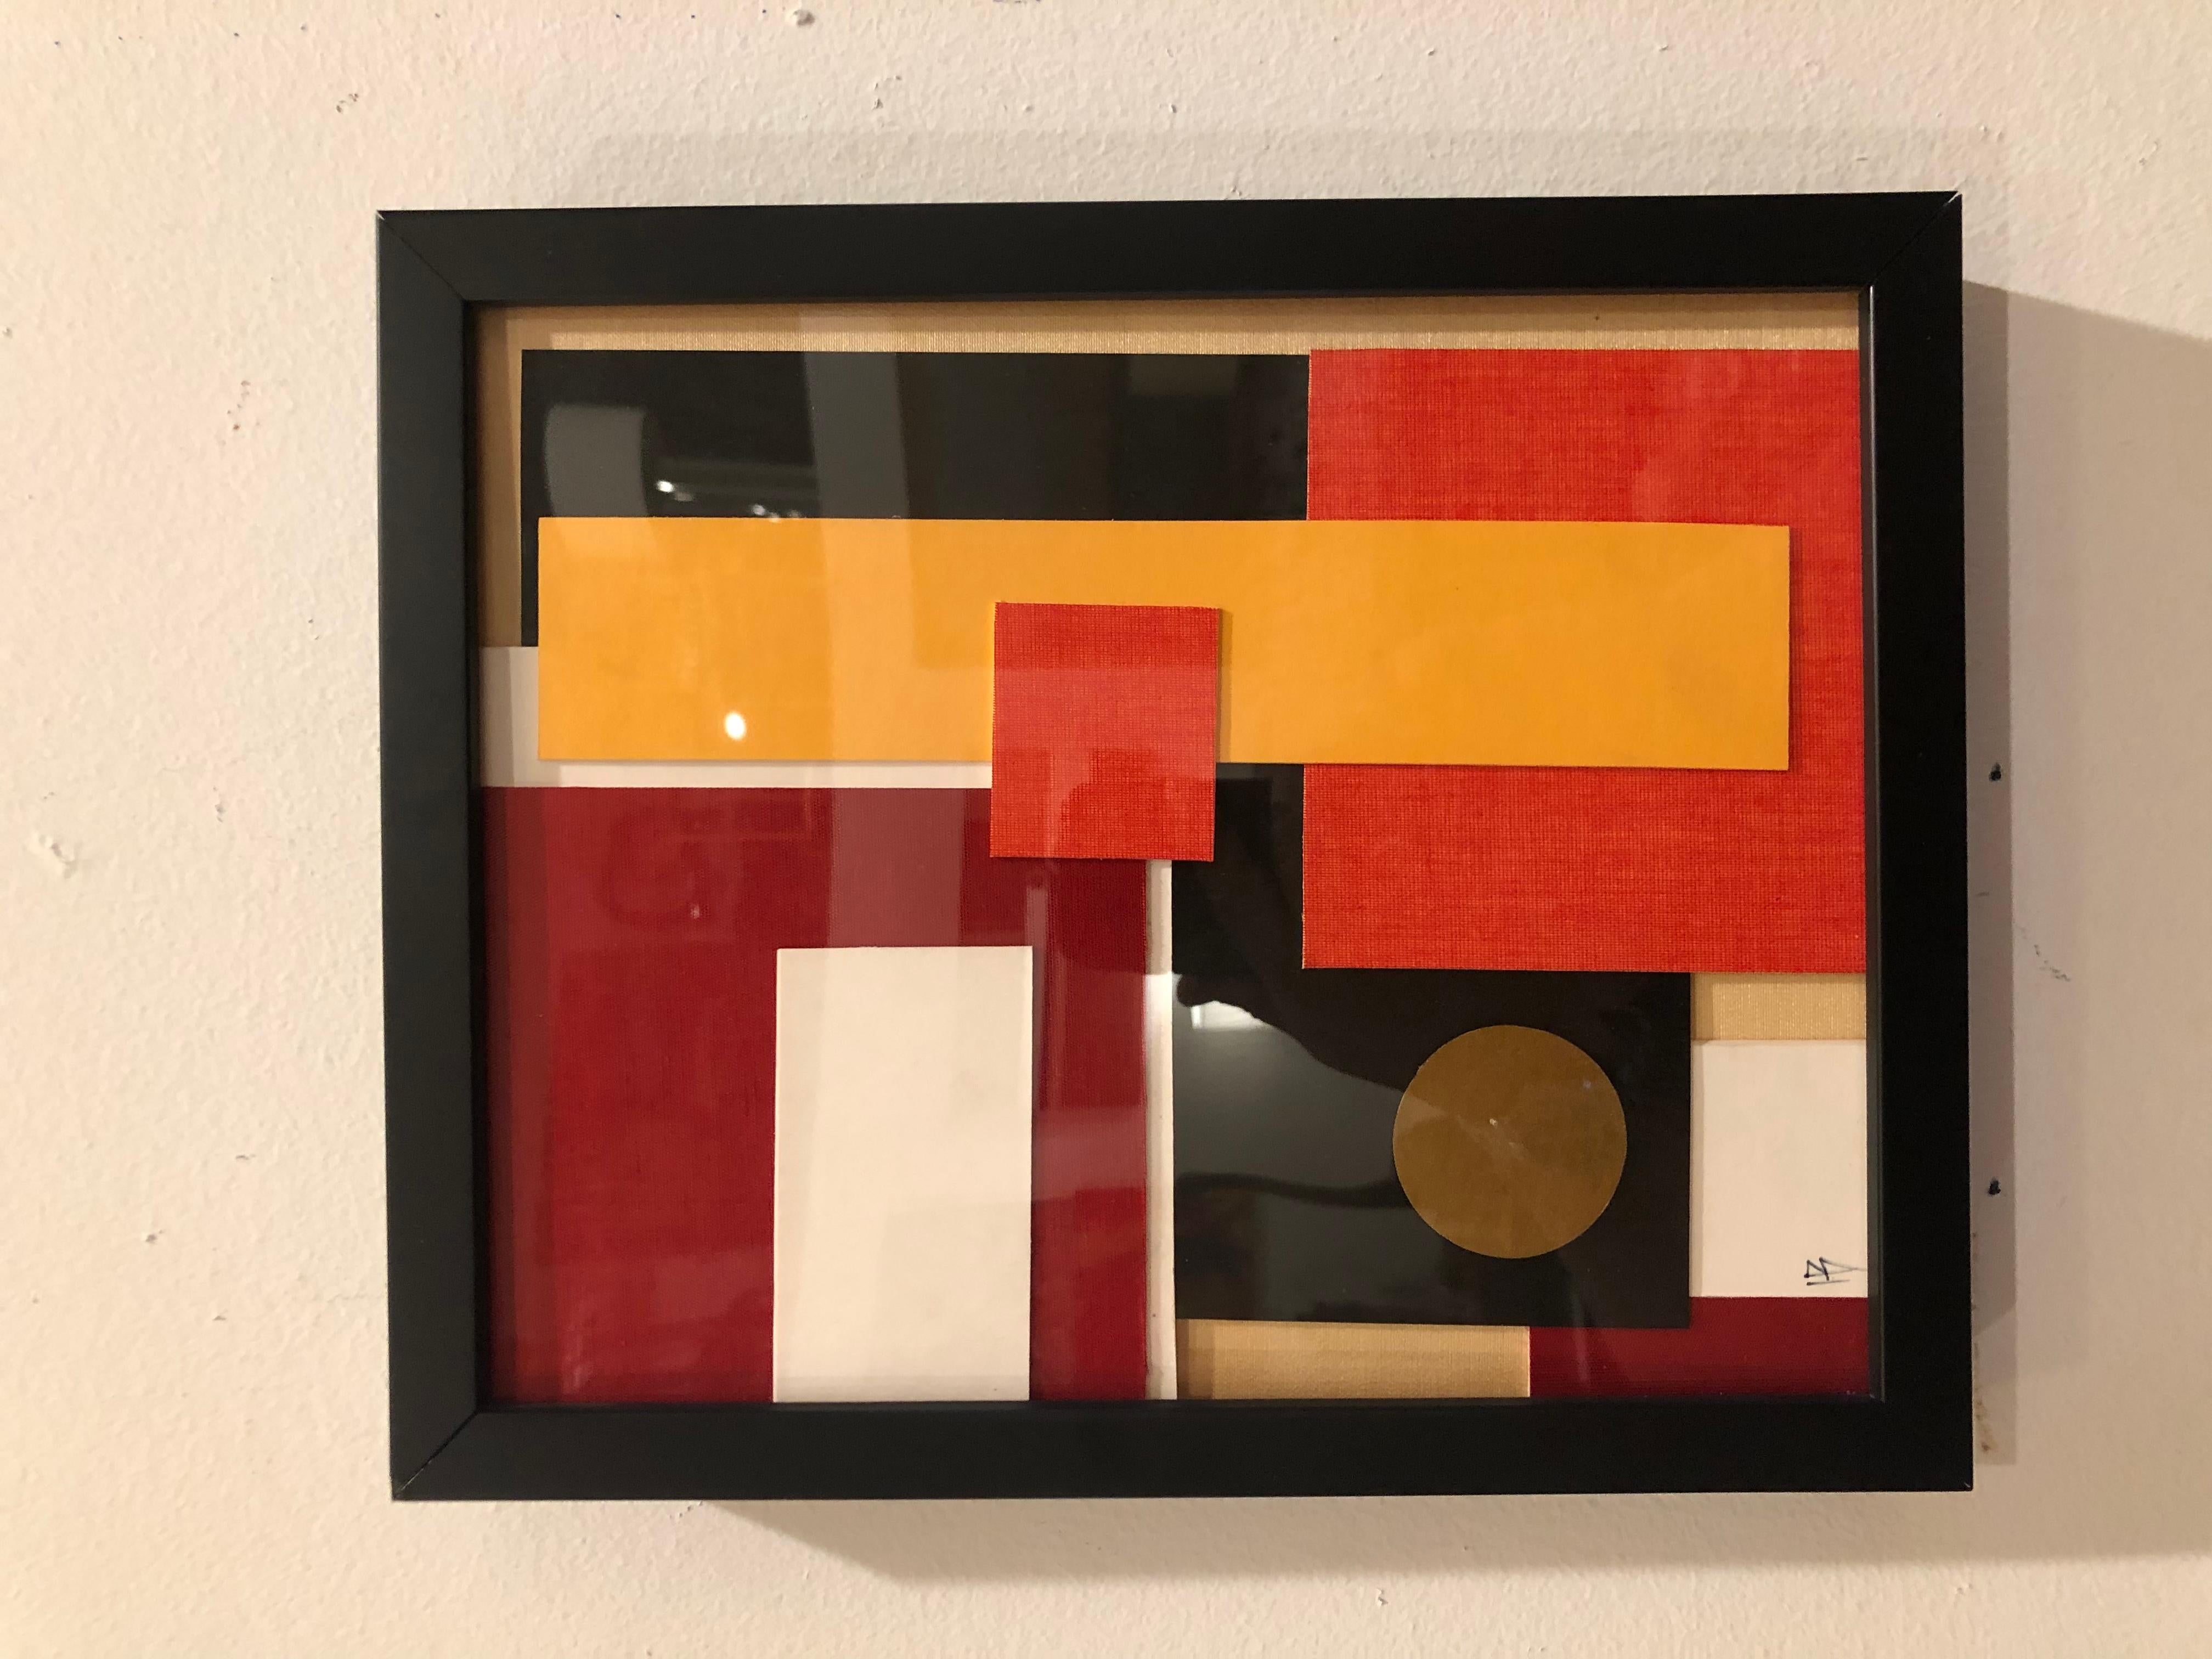 Geometric Collage by Artist Heather Borsche Contemporary Art, Whimsical collage by San Diego artist, framed piece with great colors and post Modern Memphis look.